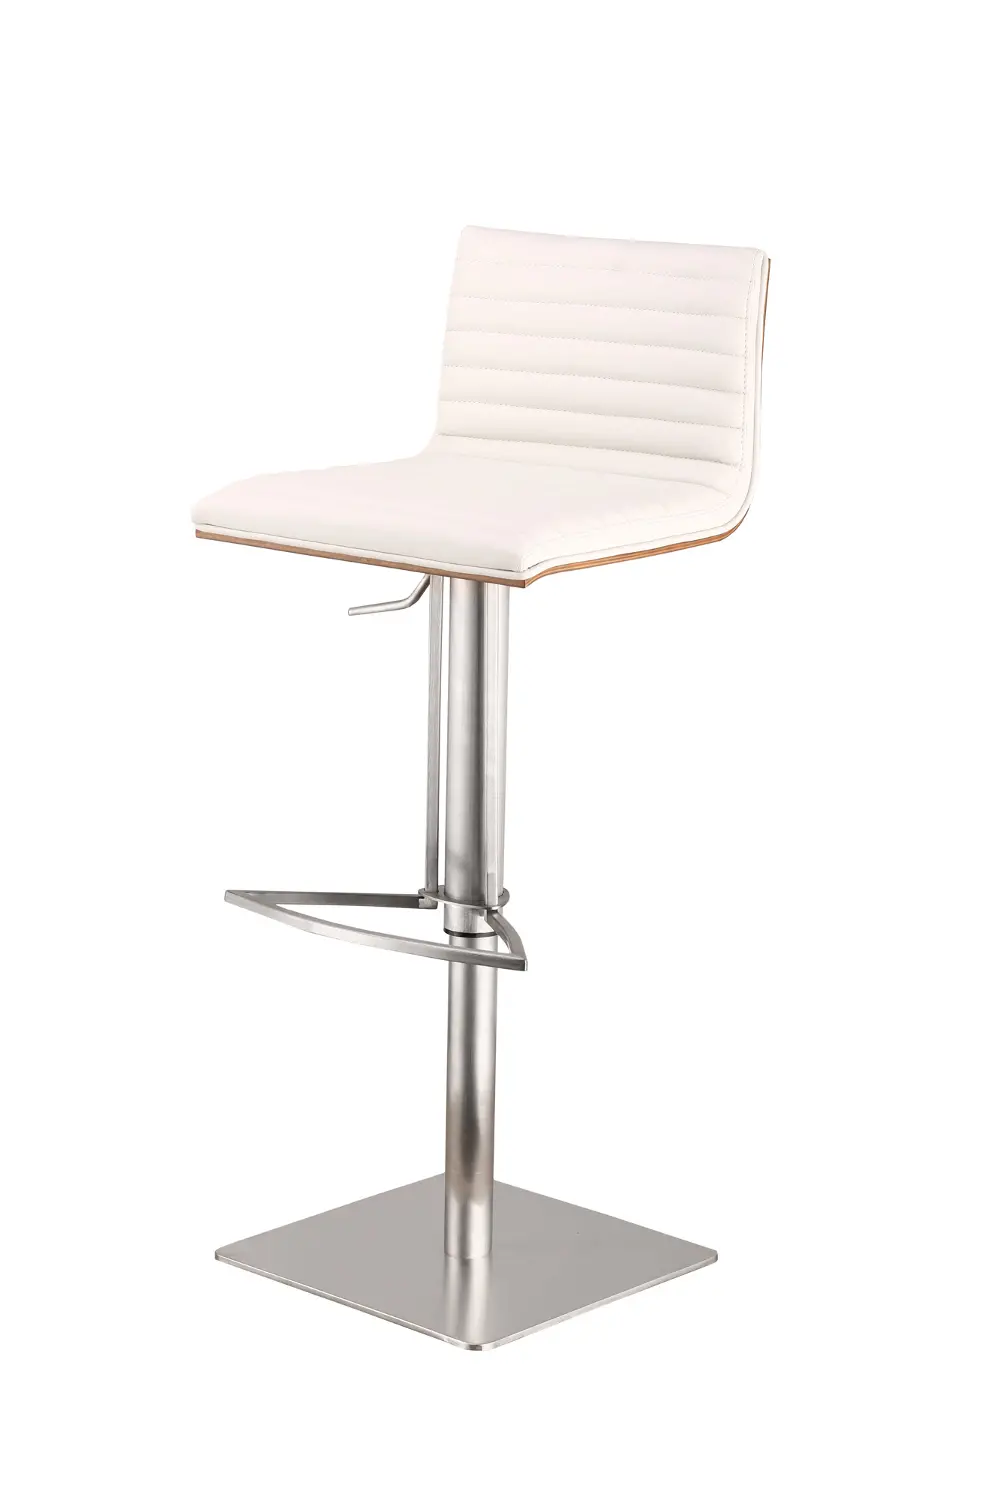 LCCASWBAWHB201 Stainless Steel & White Adjustable Bar Stool - Café-1